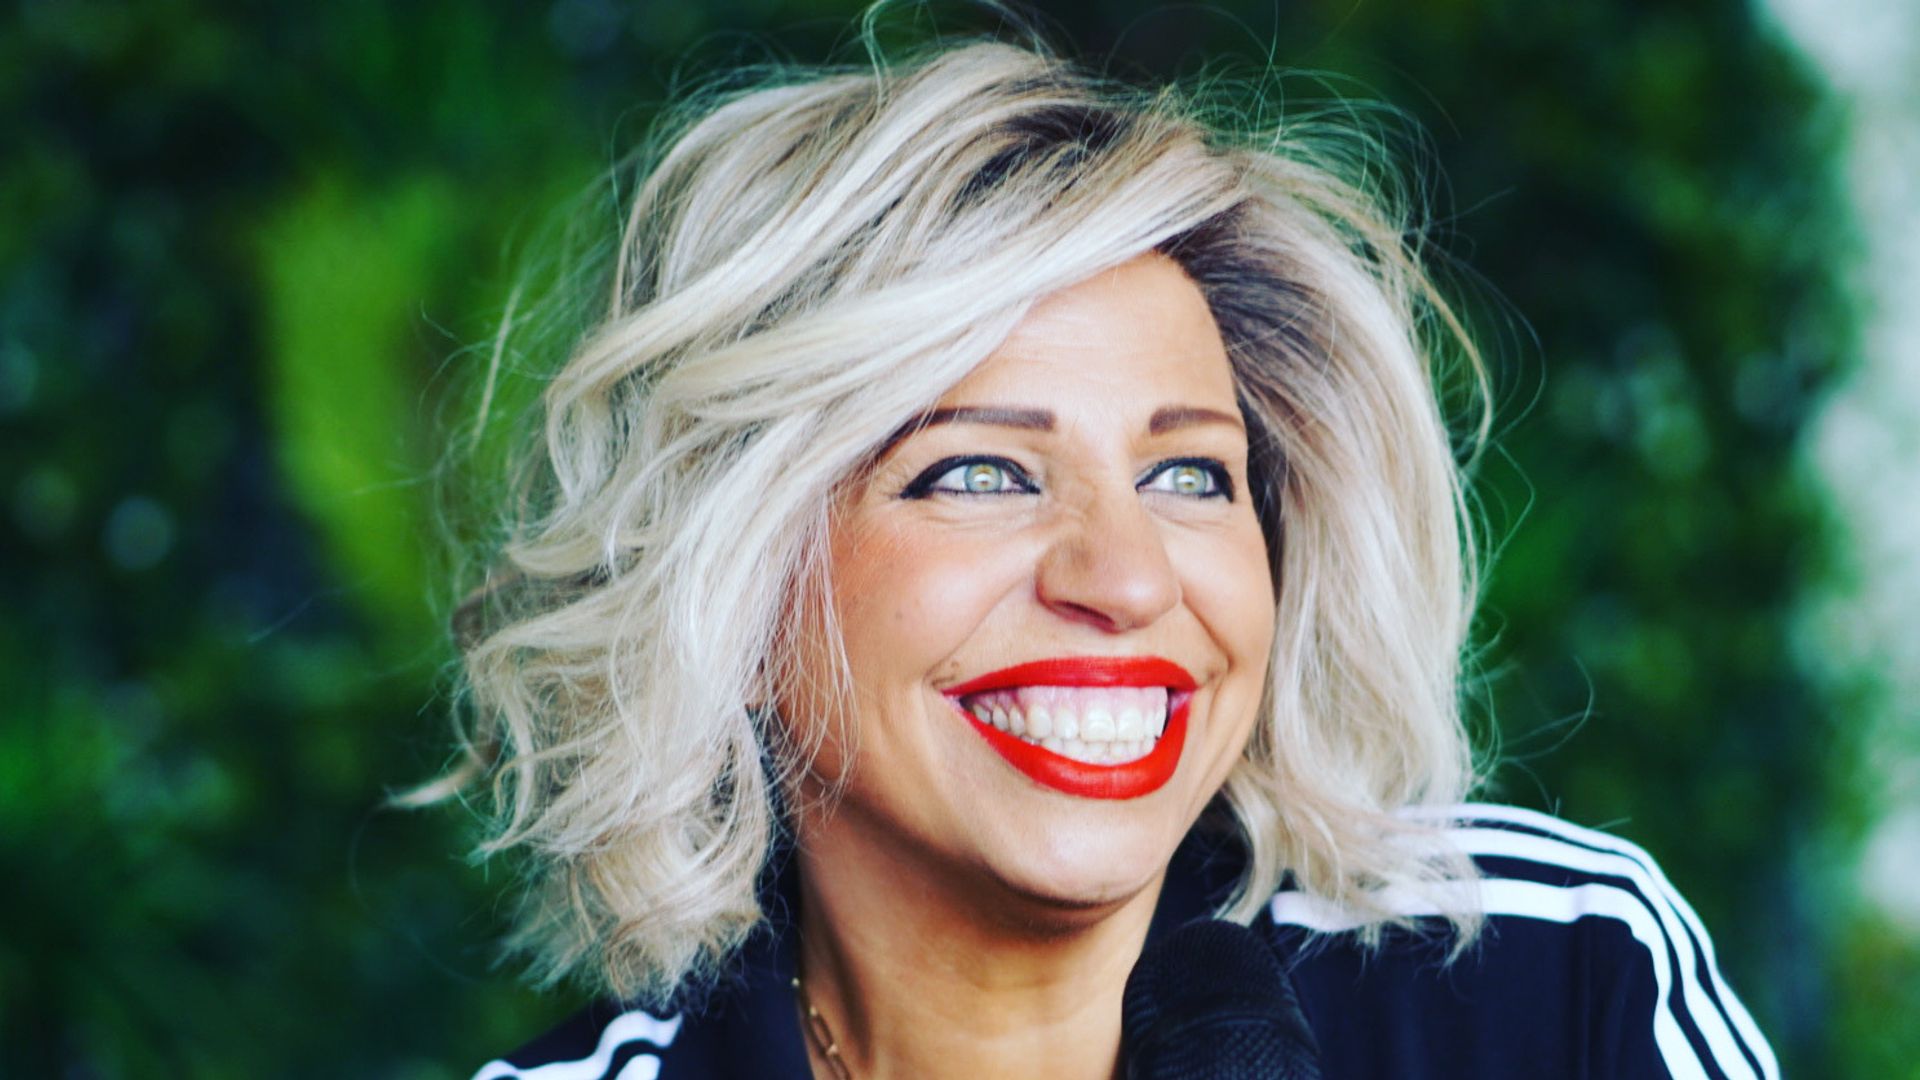 Smiling woman with red lipstick